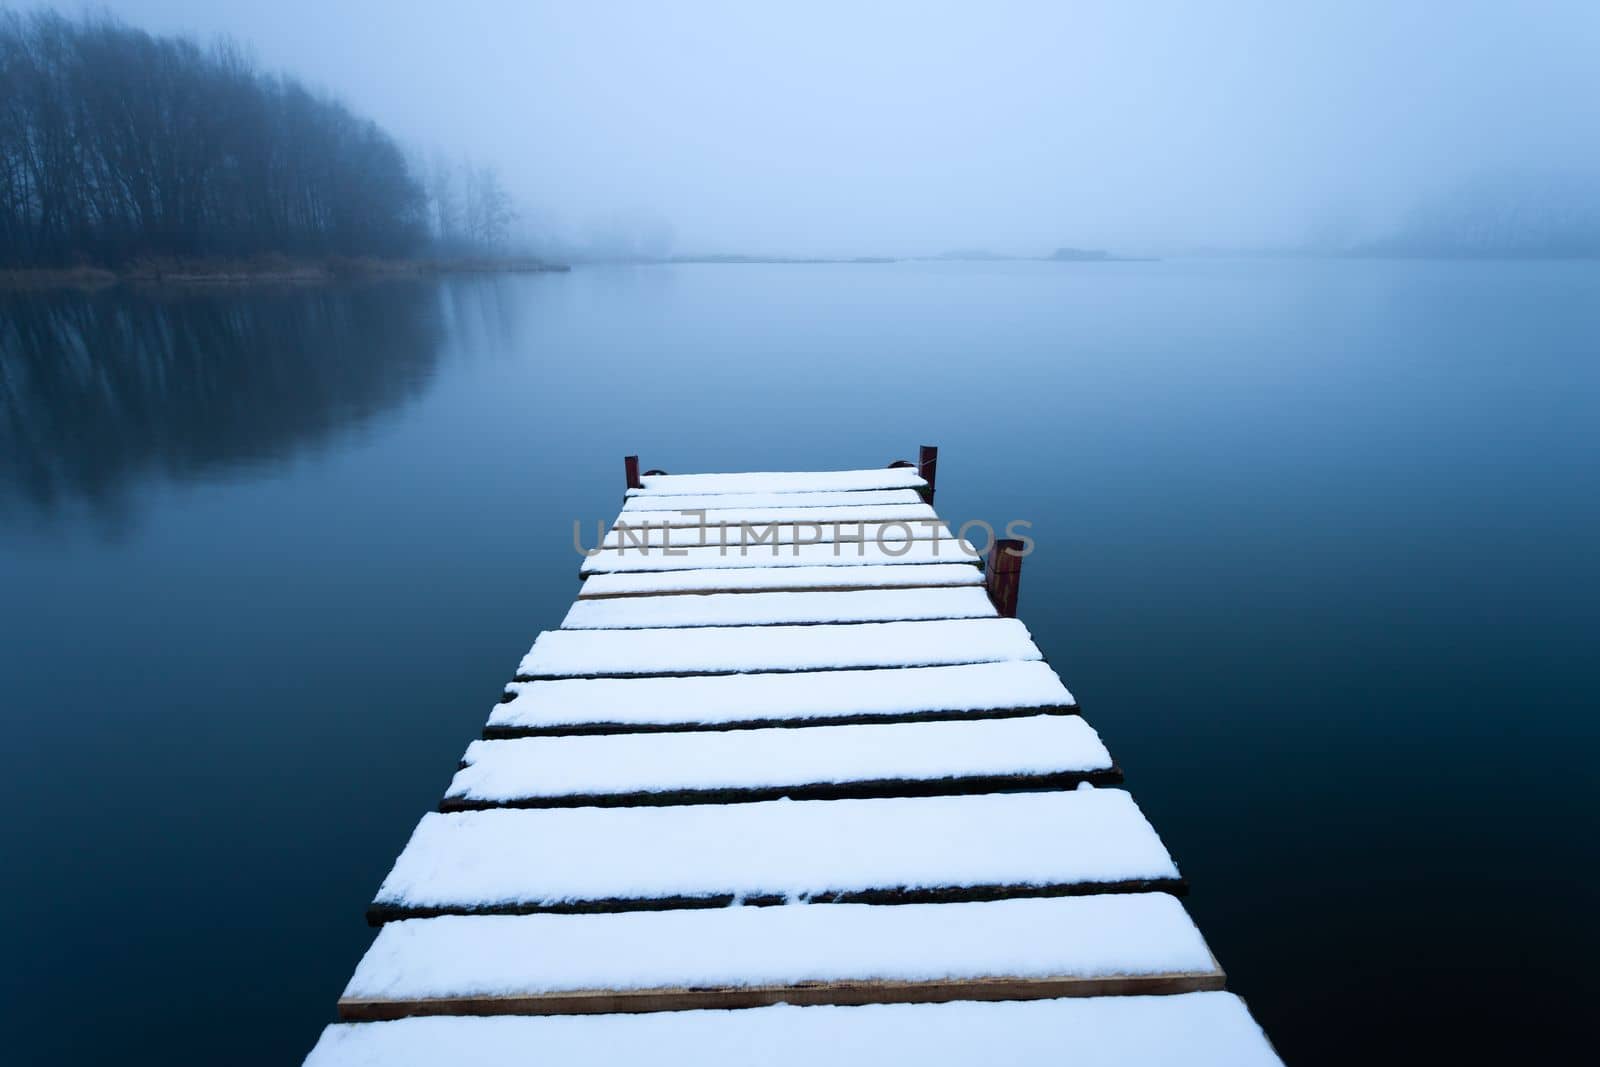 Snow on the pier and foggy lake, Stankow, eastern Poland